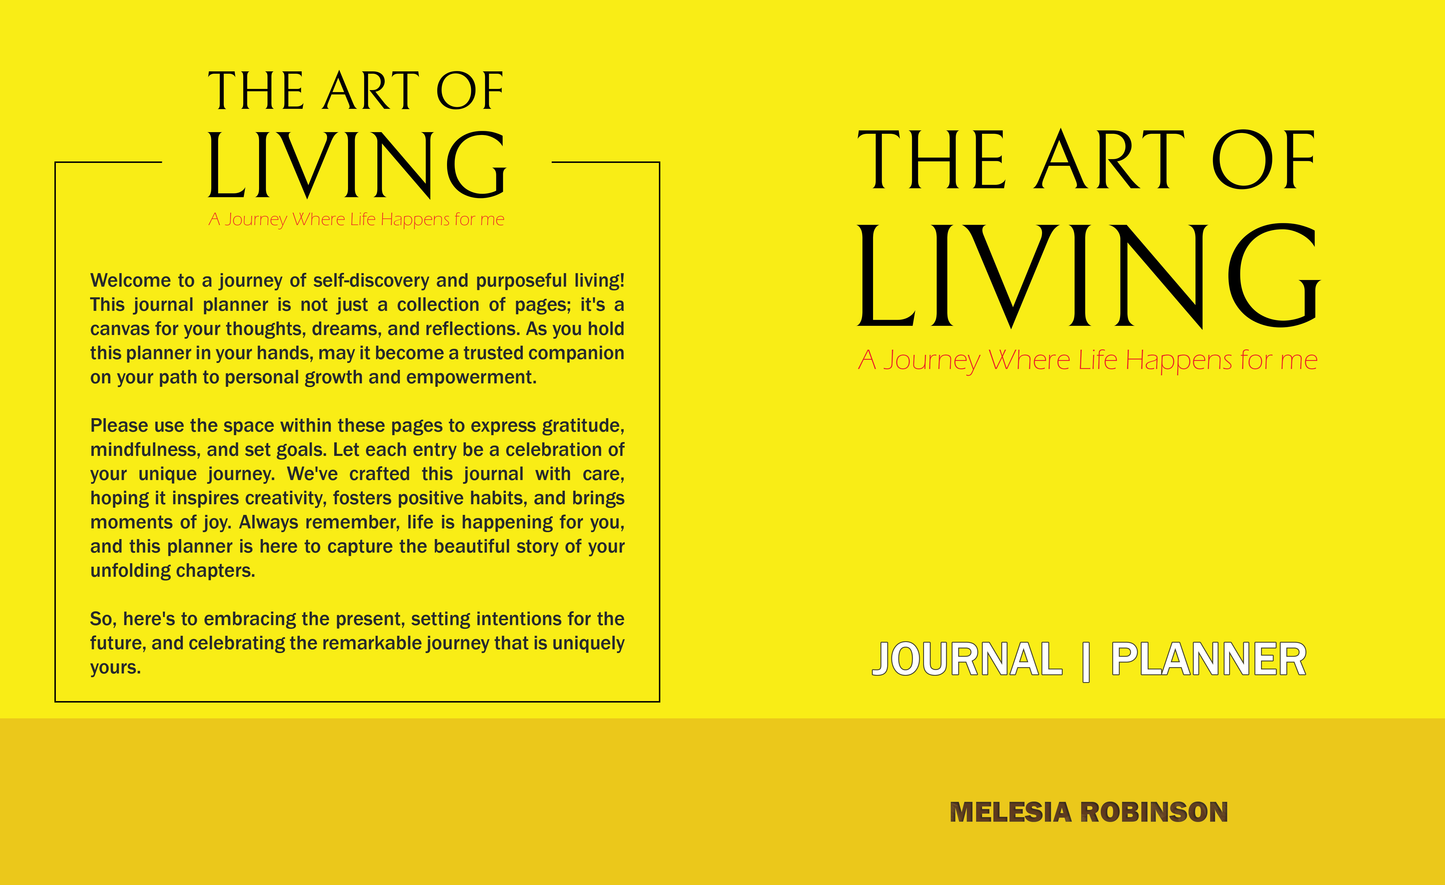 The Art of Living: A Journey where Life Happens for Me